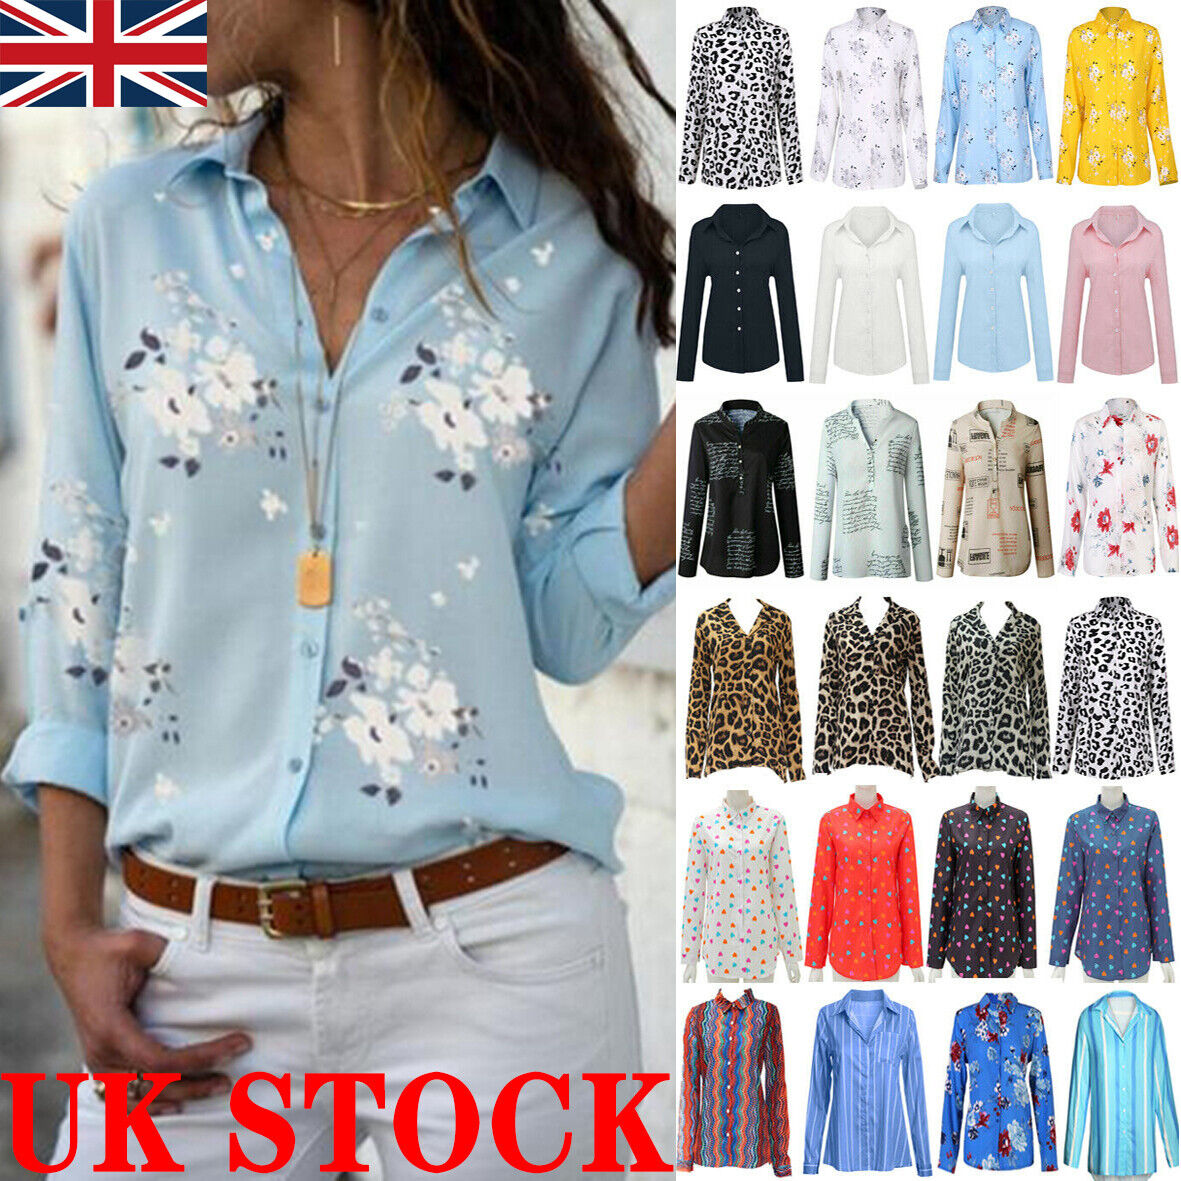 Tops for Women Work Casual Cardigans for Women UK Ladies Long